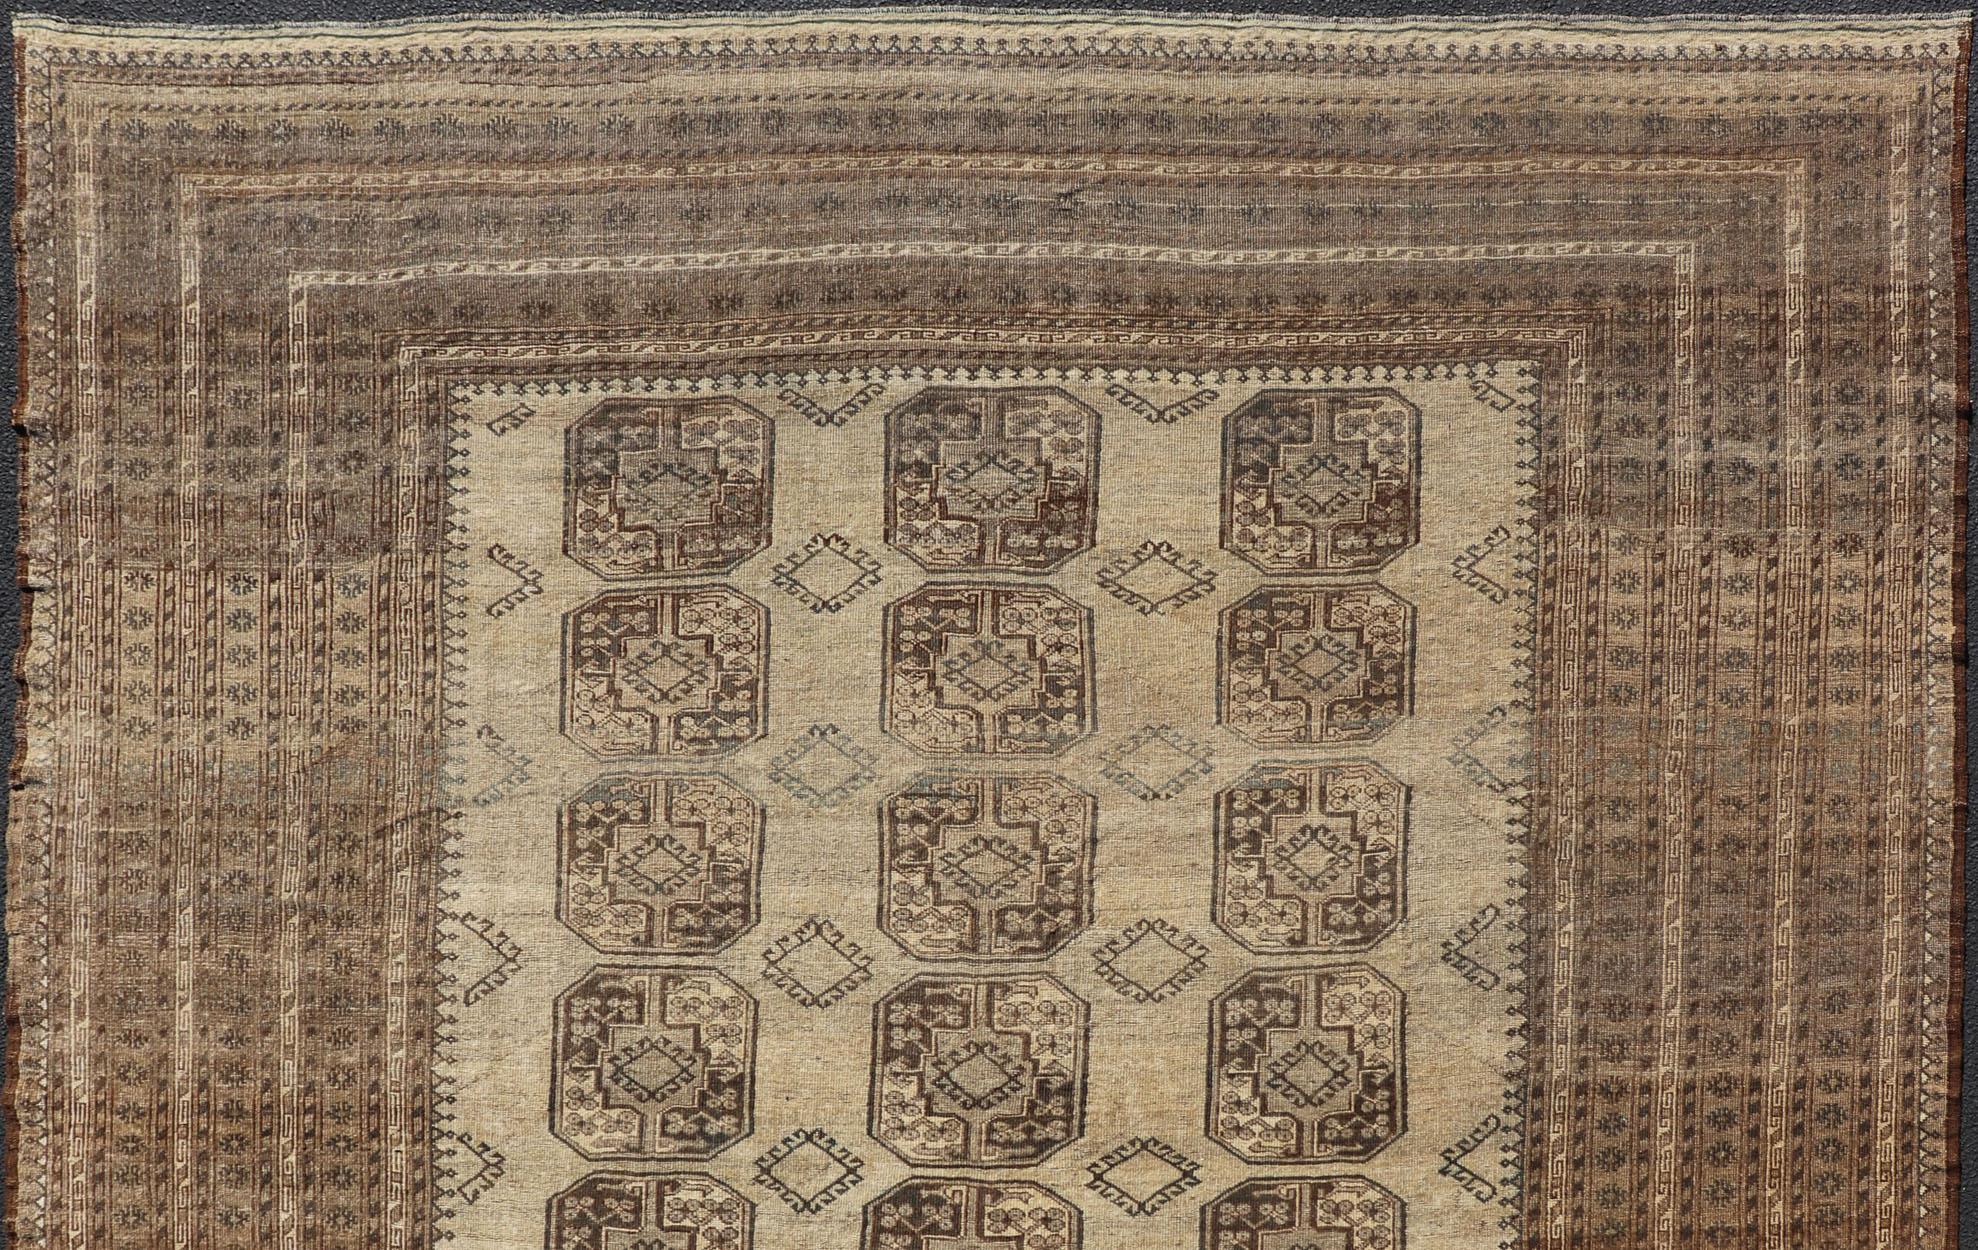 This square sized Ersari rug has been hand-knotted in the finest wool. The rug features an all-over sub-geometric repeating Gul design throughout the entirety of the rug, enclosed within a complementary, multi-tiered border, depicting small